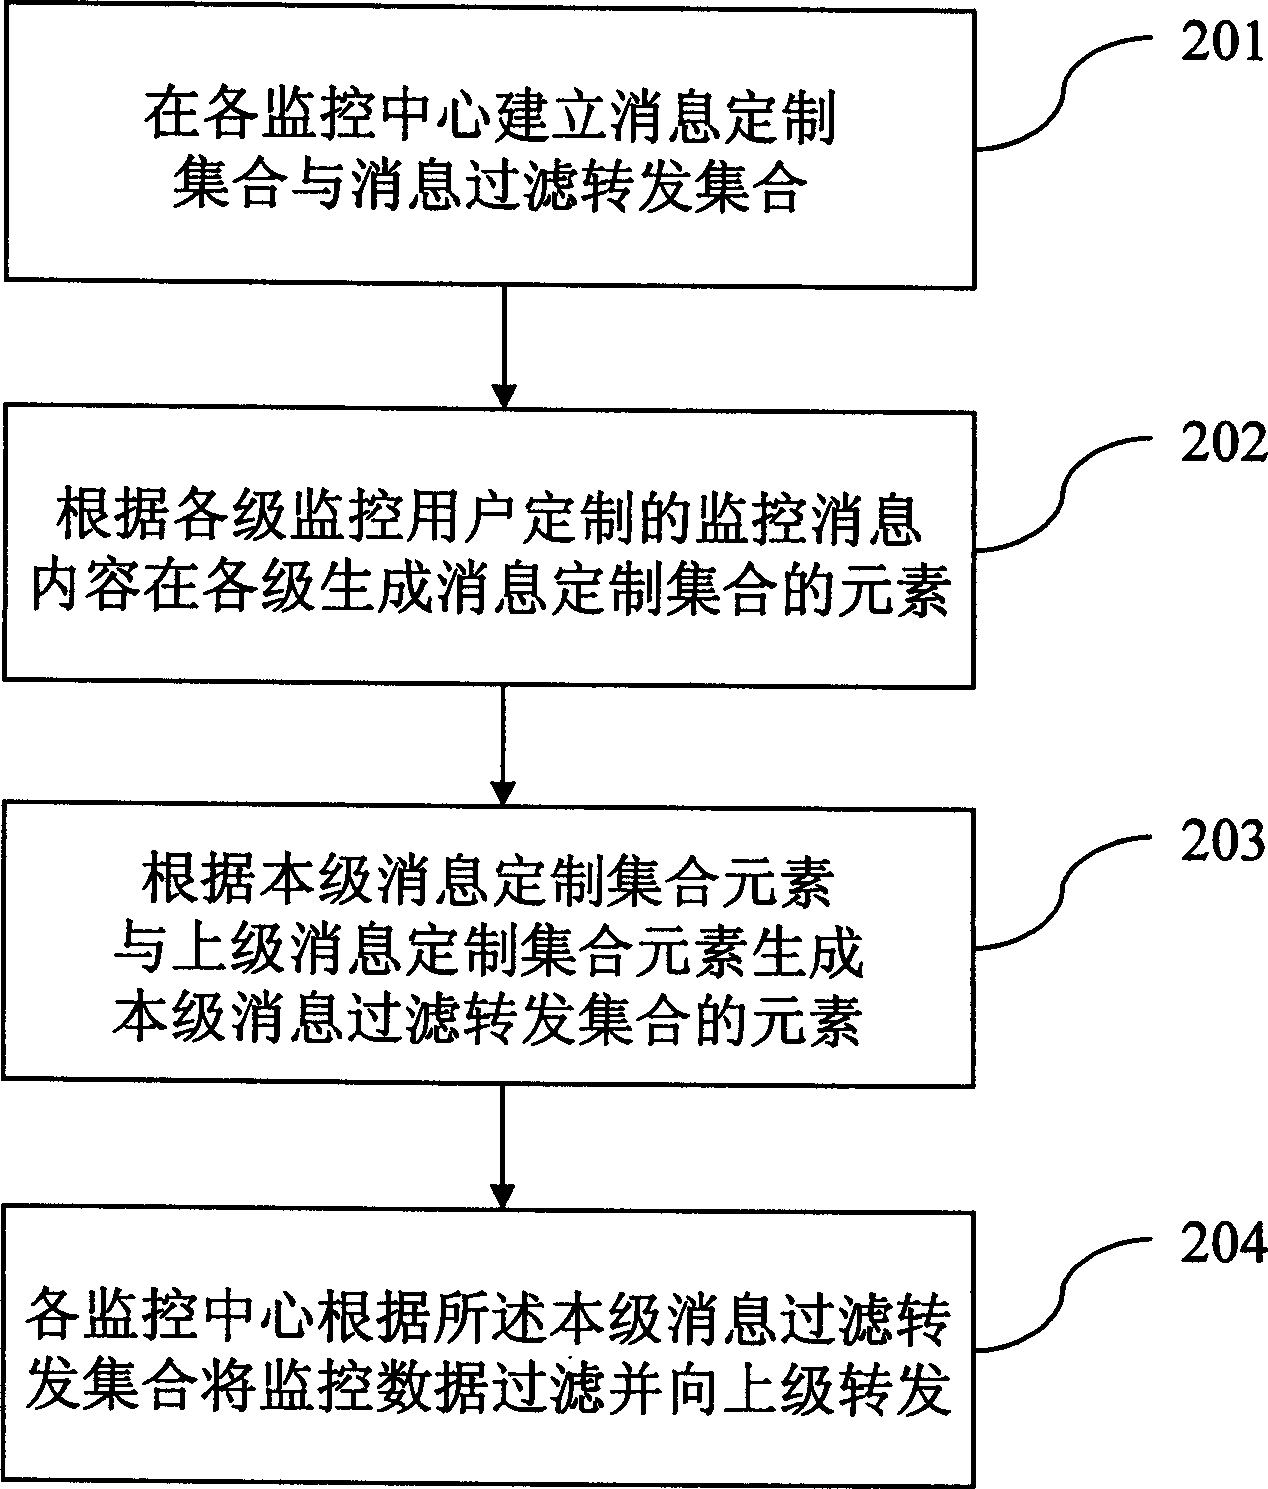 Method for controlling cascade network management monitoring system flow